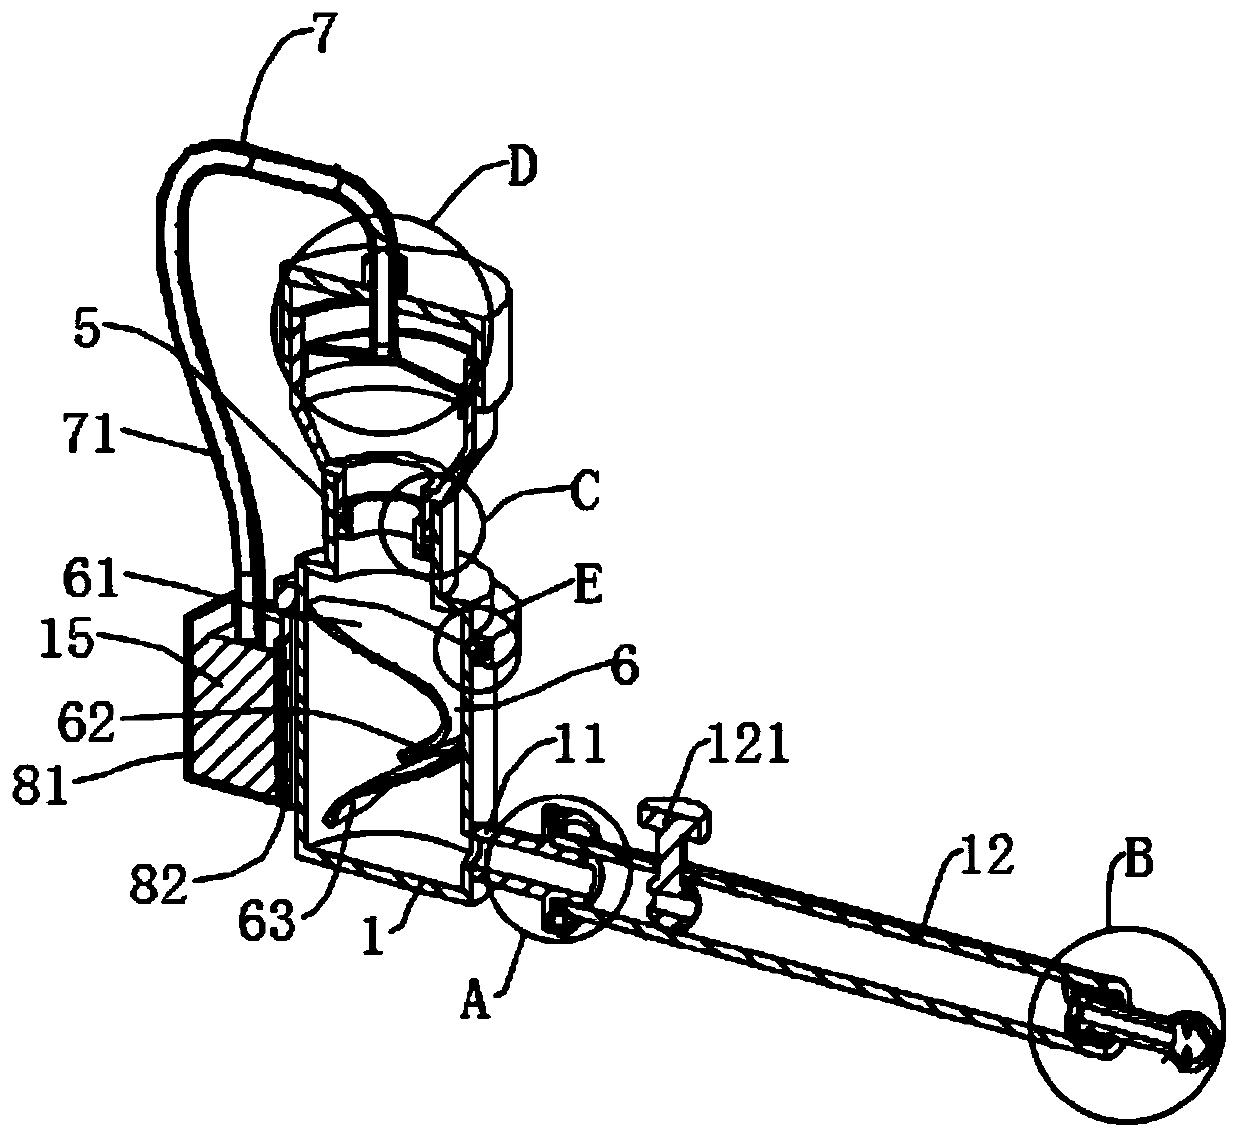 Urethral drug delivery device for urinary surgery